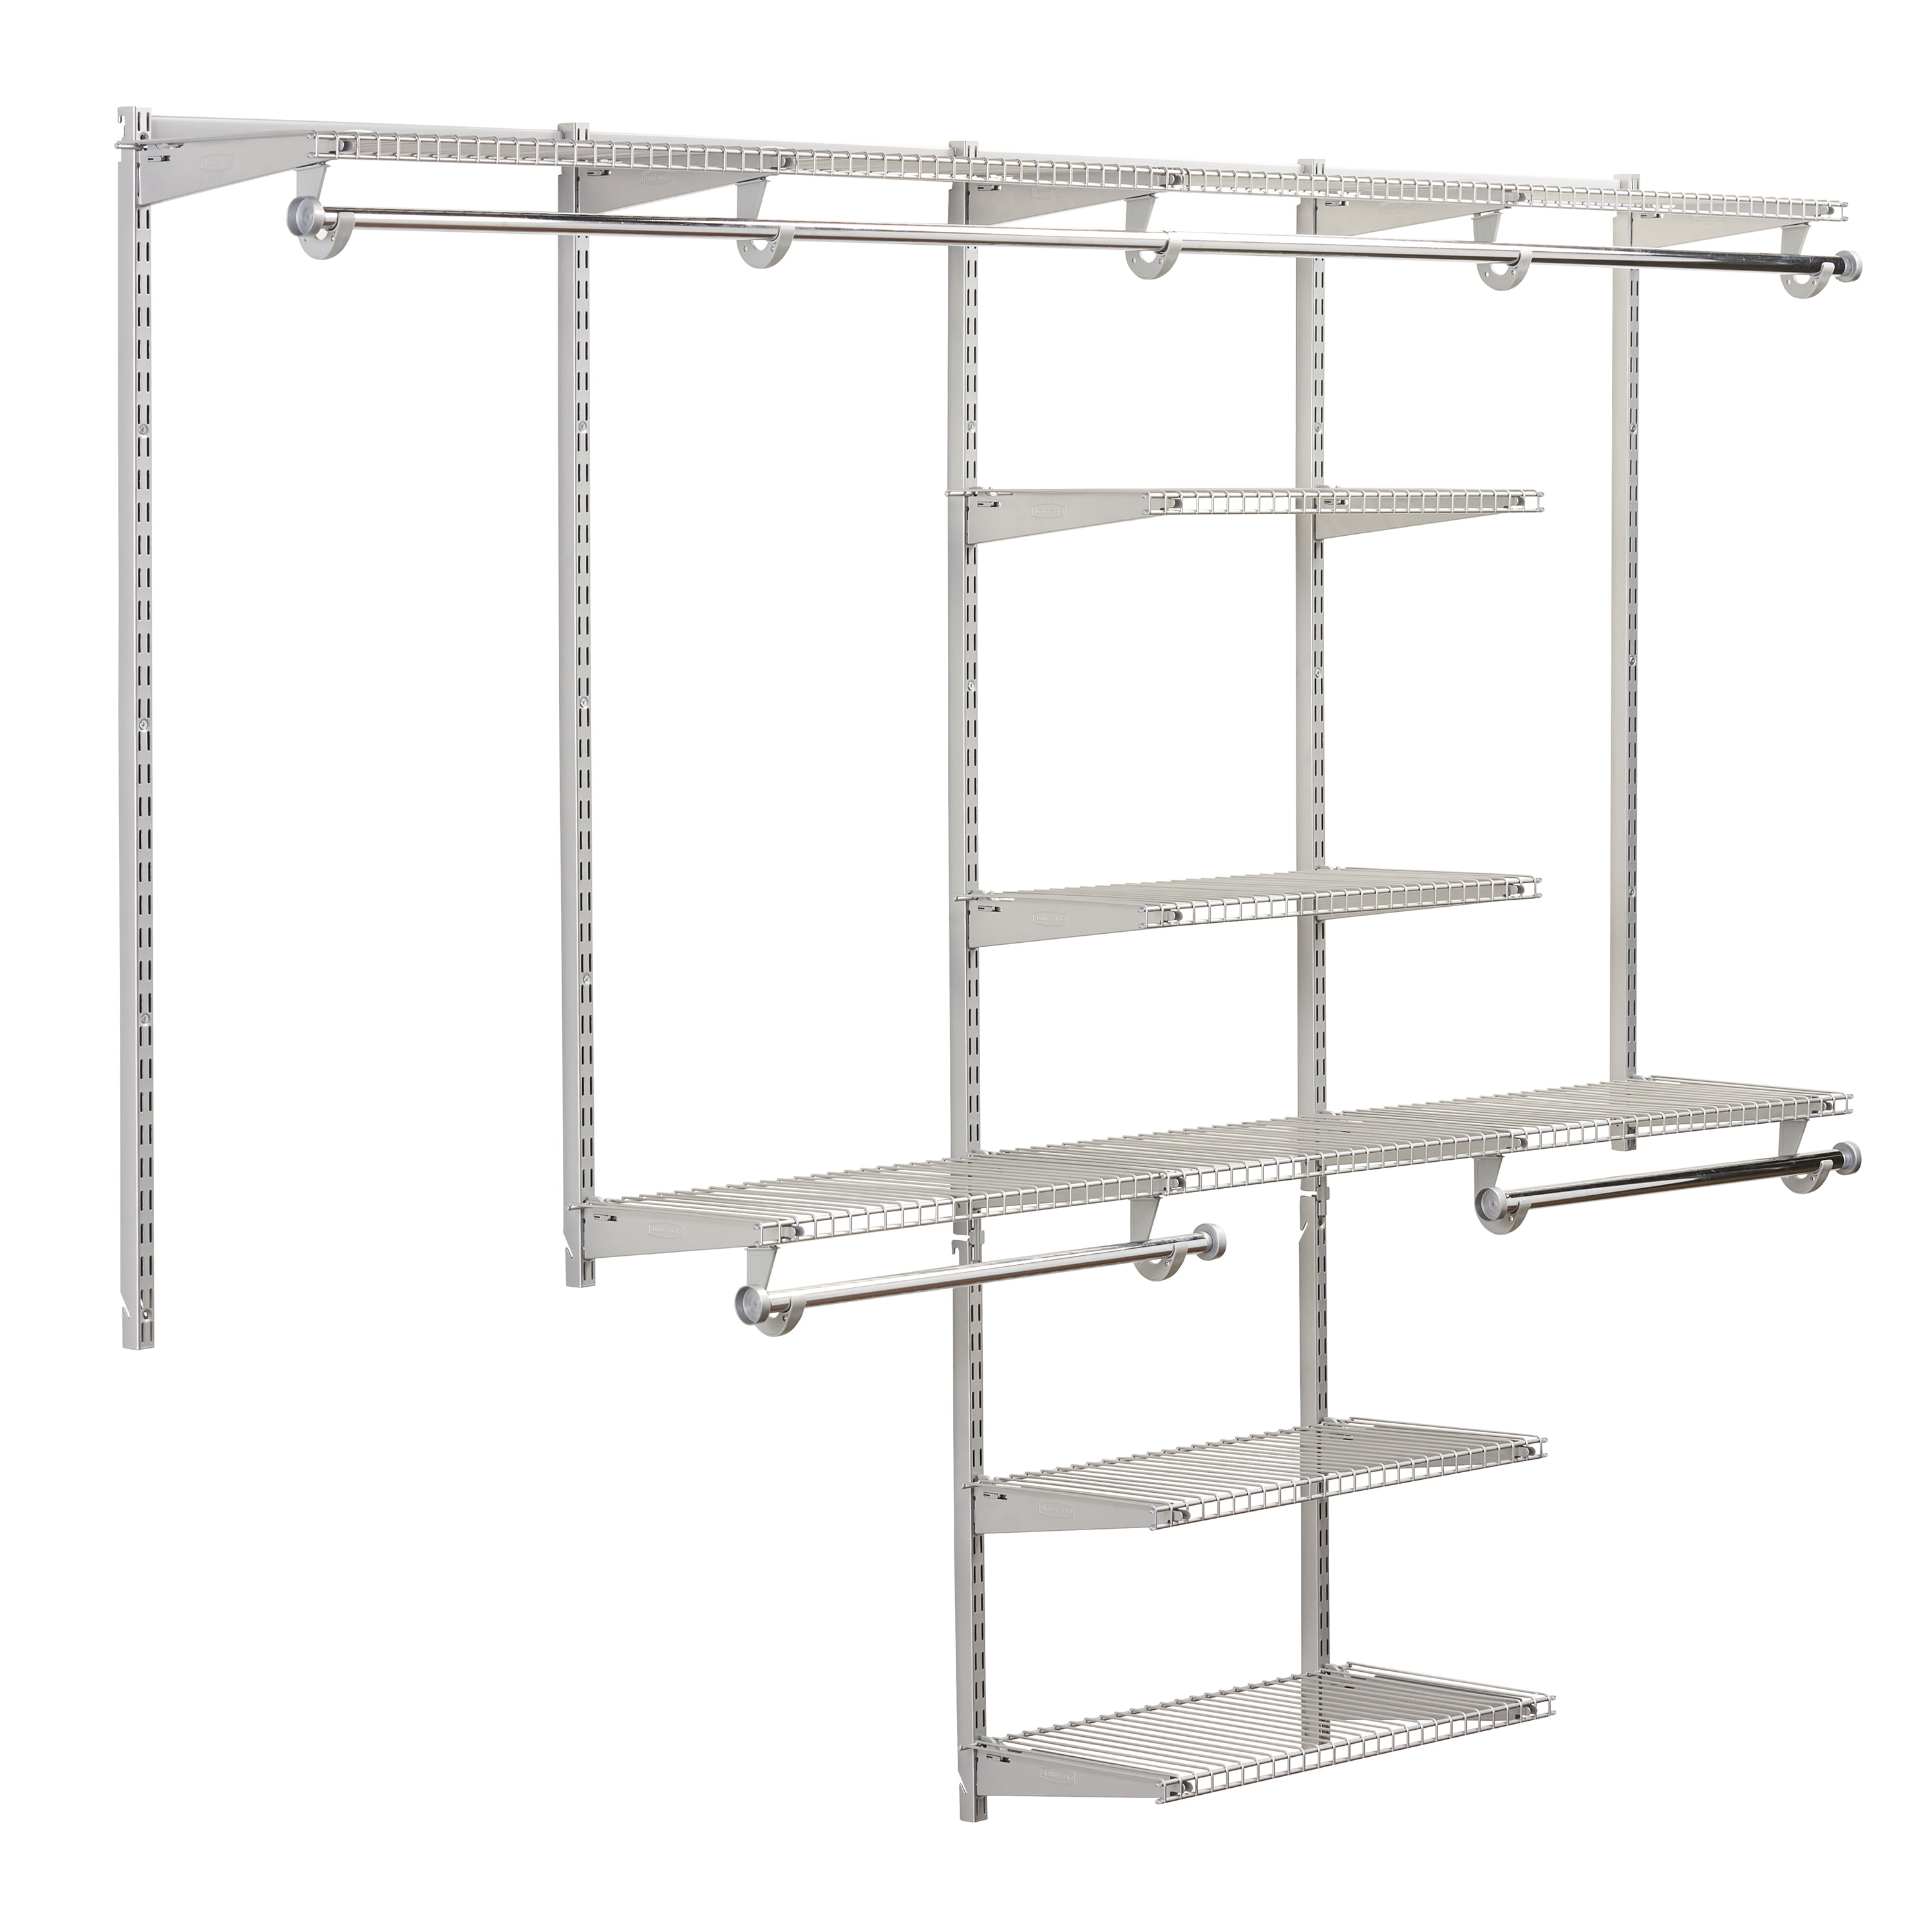 Rubbermaid Configurations 4 Ft. to 8 Ft. No-Cut Adjustable Closet Kit -  Dazey's Supply